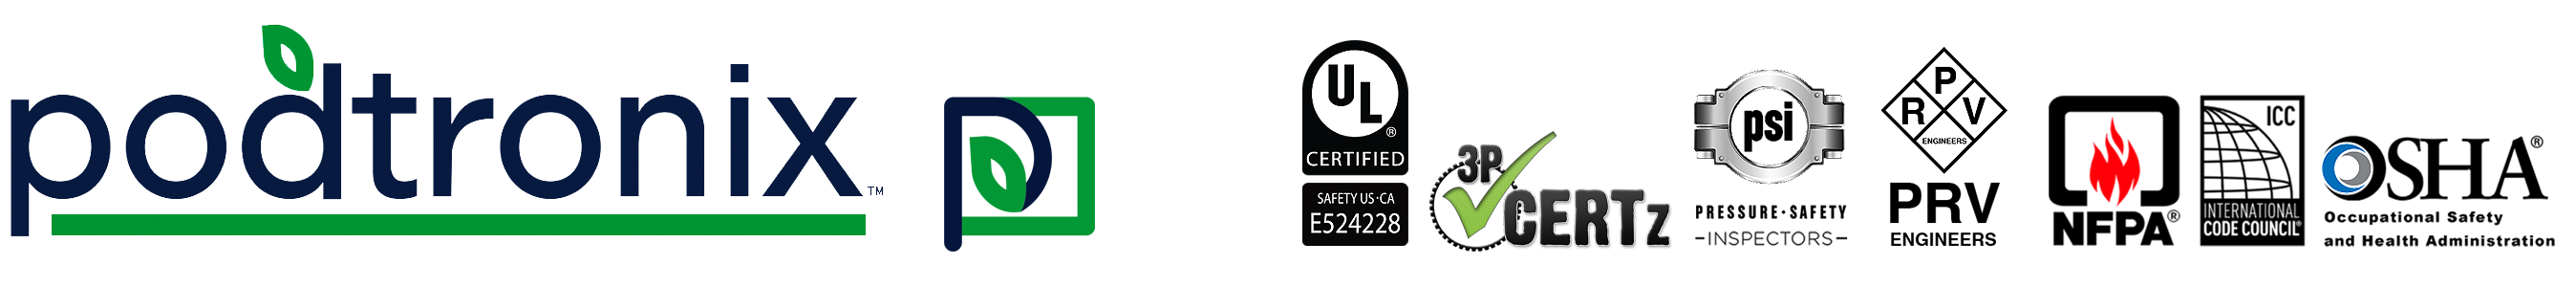 Podtronix | UL Certified C1D1 Extraction Labs